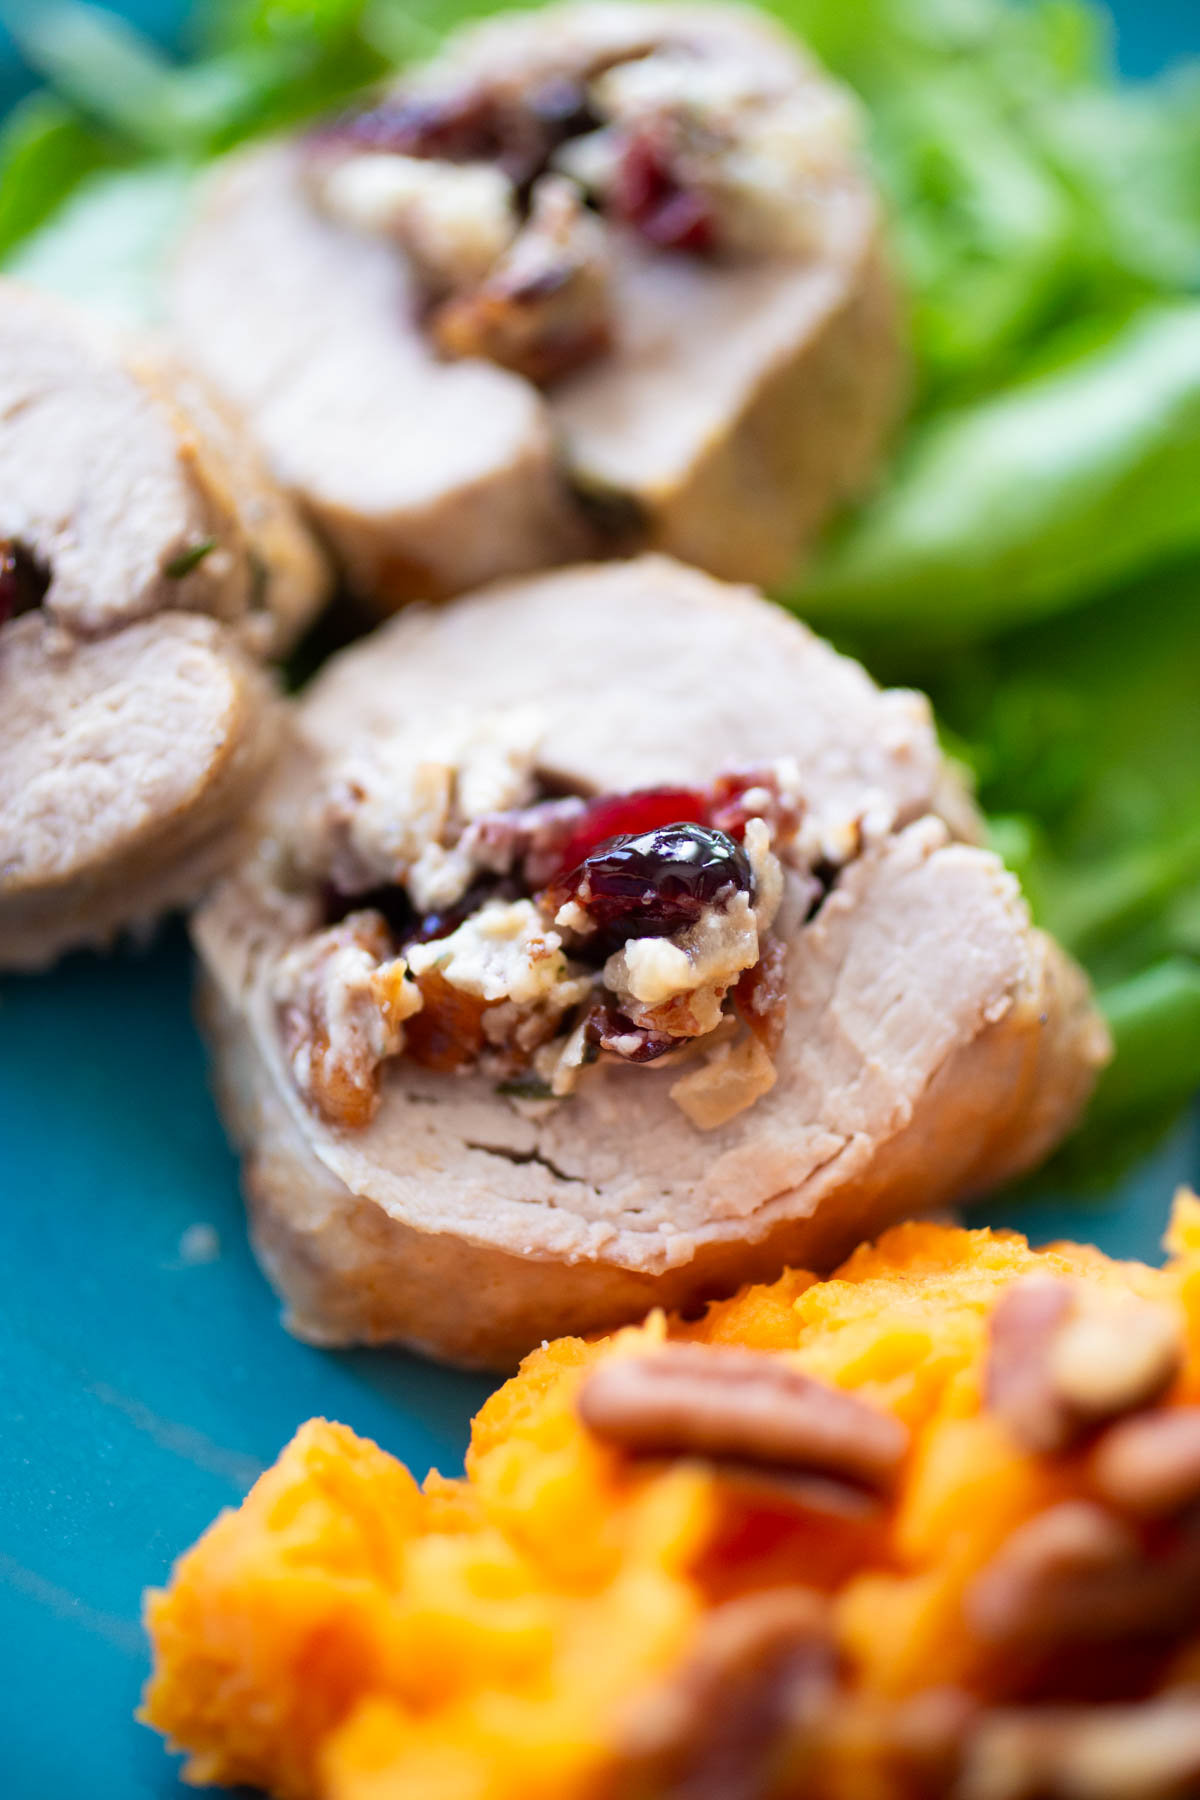 The pork tenderloin has been sliced and served, you can see the cranberry blue cheese filling.